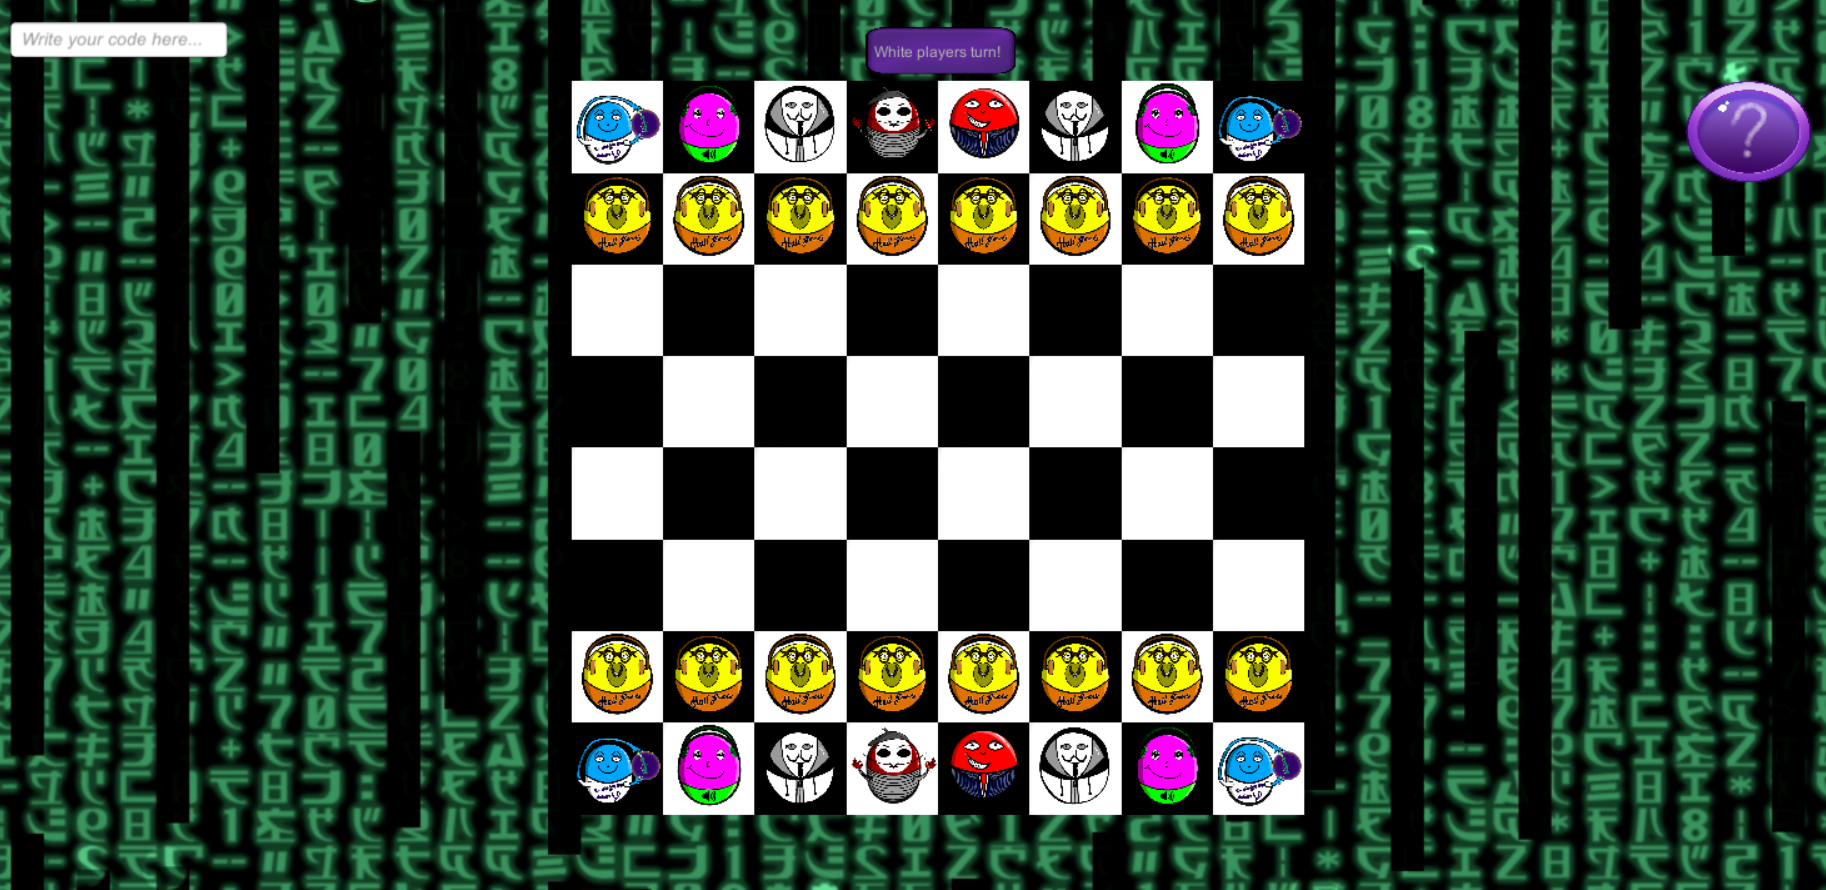 Toon Clash CHESS instal the new version for windows